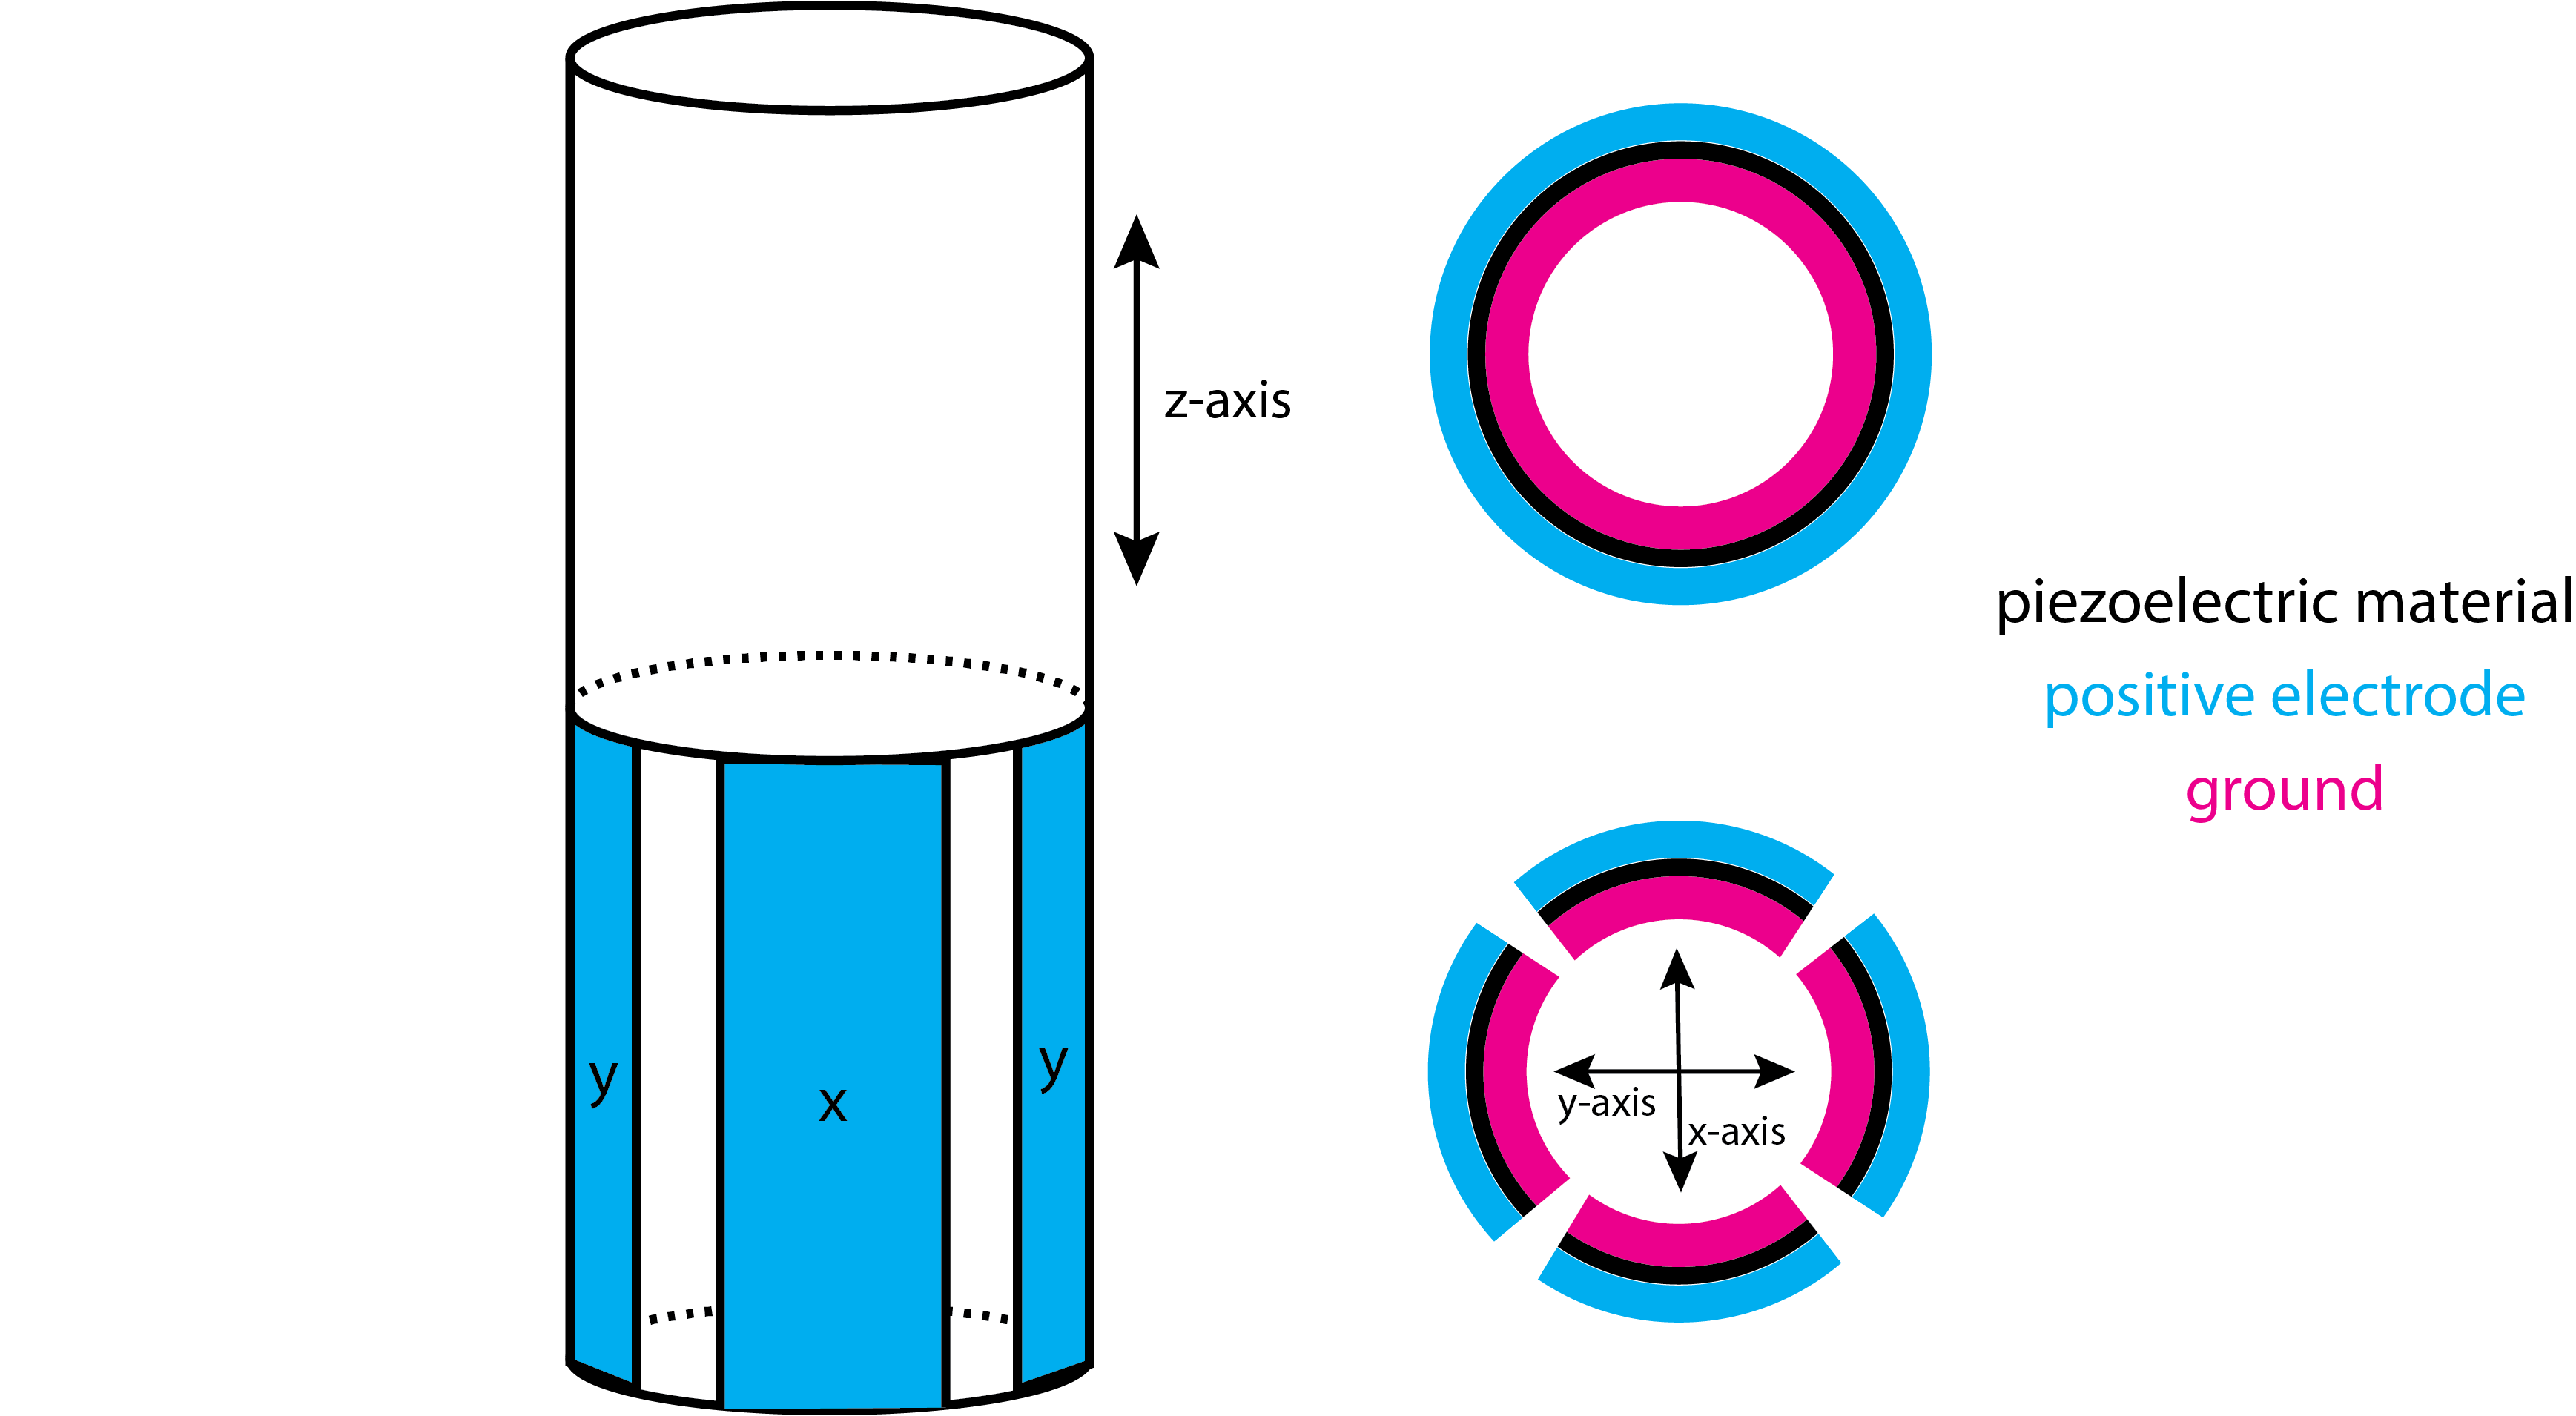 Illustration that shows the design of a piezoelectric scanner. The top half of the scanner controls movement along the z-axis and the lower half of the scanner controls movement along the x-axis and the y-axis. The piezoelectric material is shown in black, the positive electrodes in blue, and the ground in red.